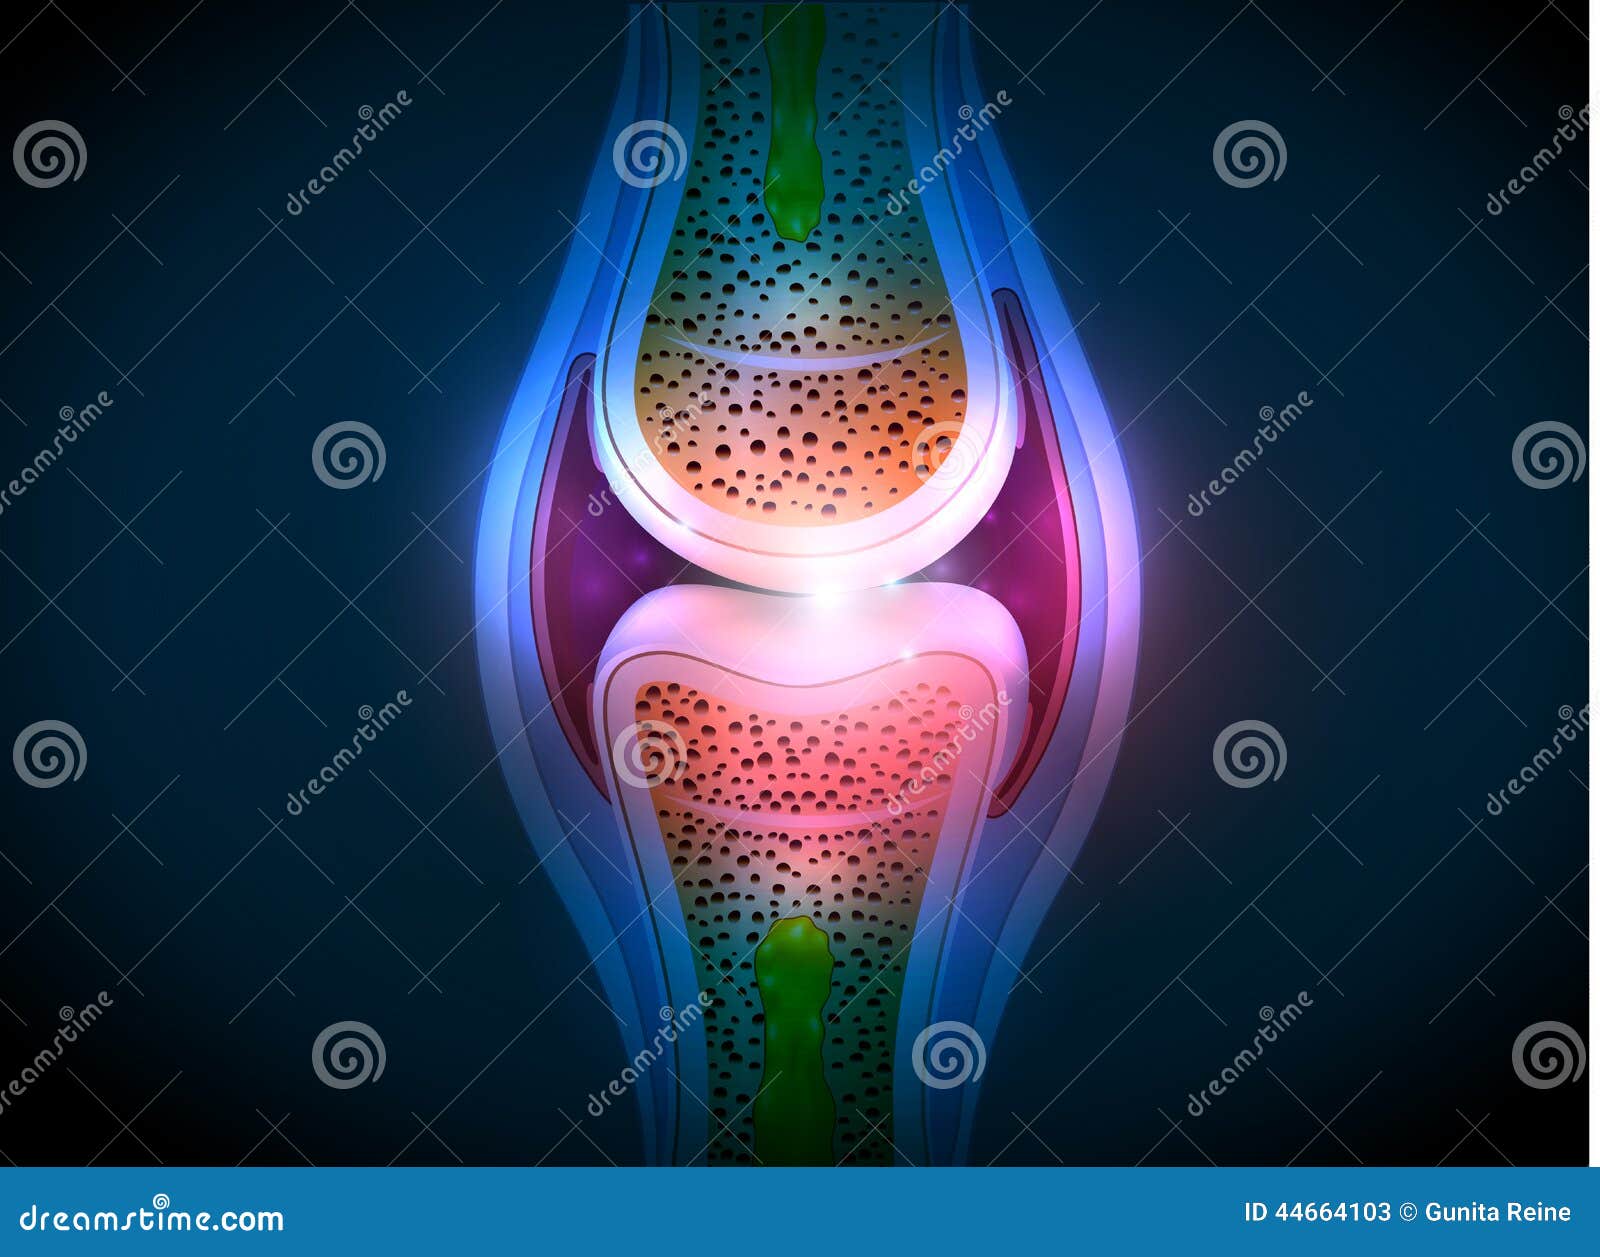 synovial joint anatomy abstract bright 